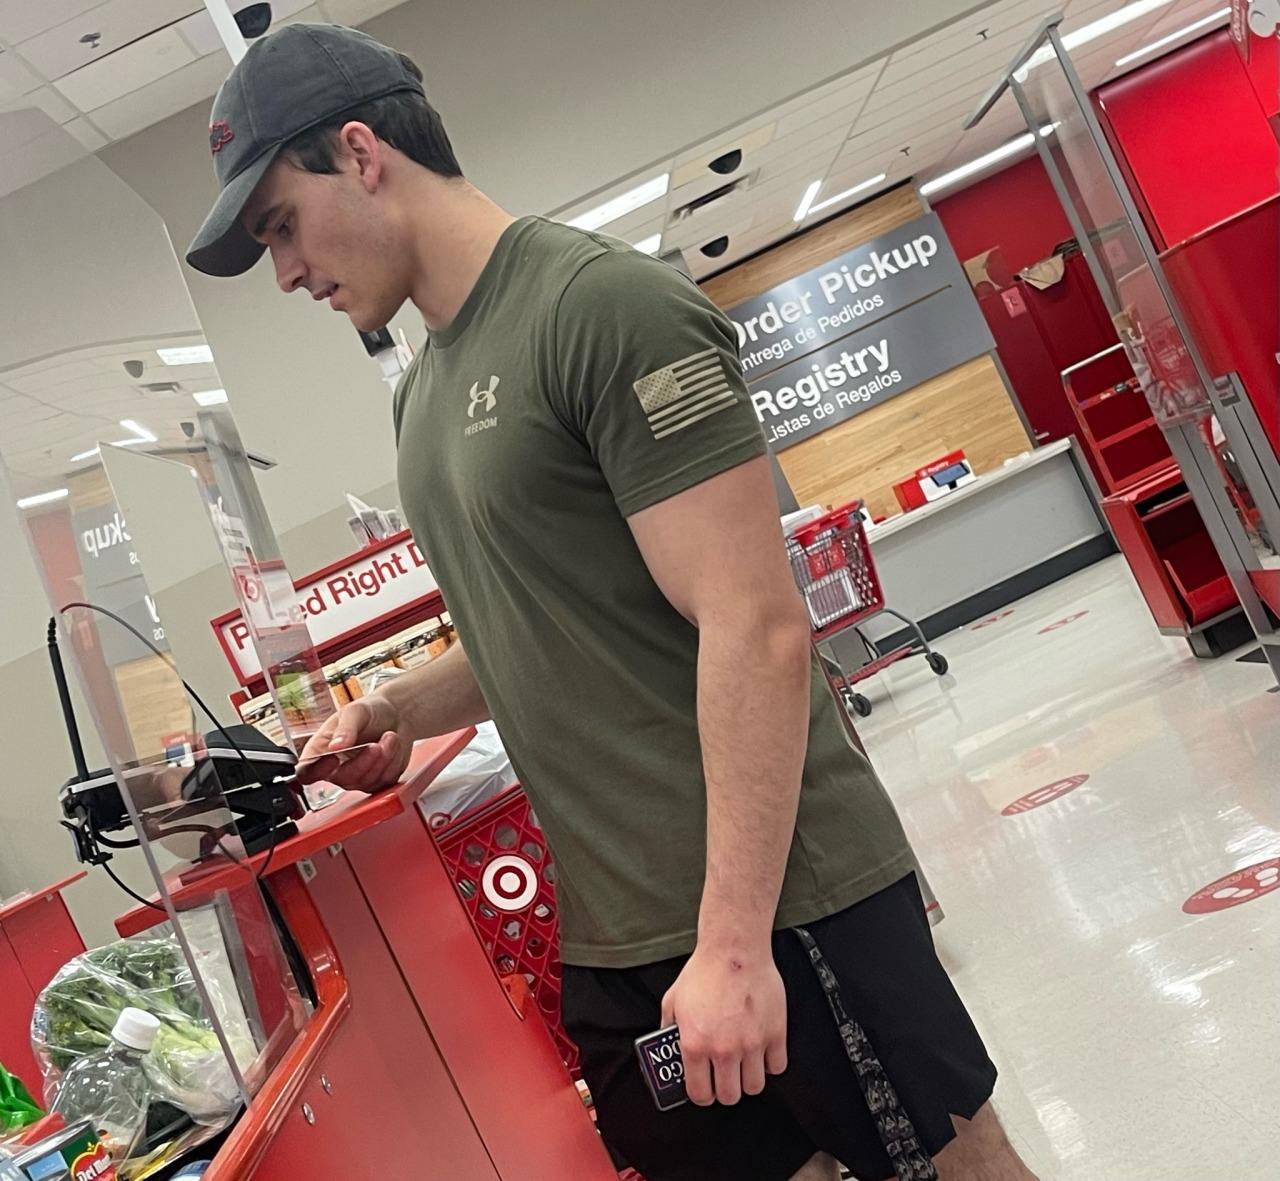 spotted-hot-target-guy-fit-body-anonymous-hunk-shopping